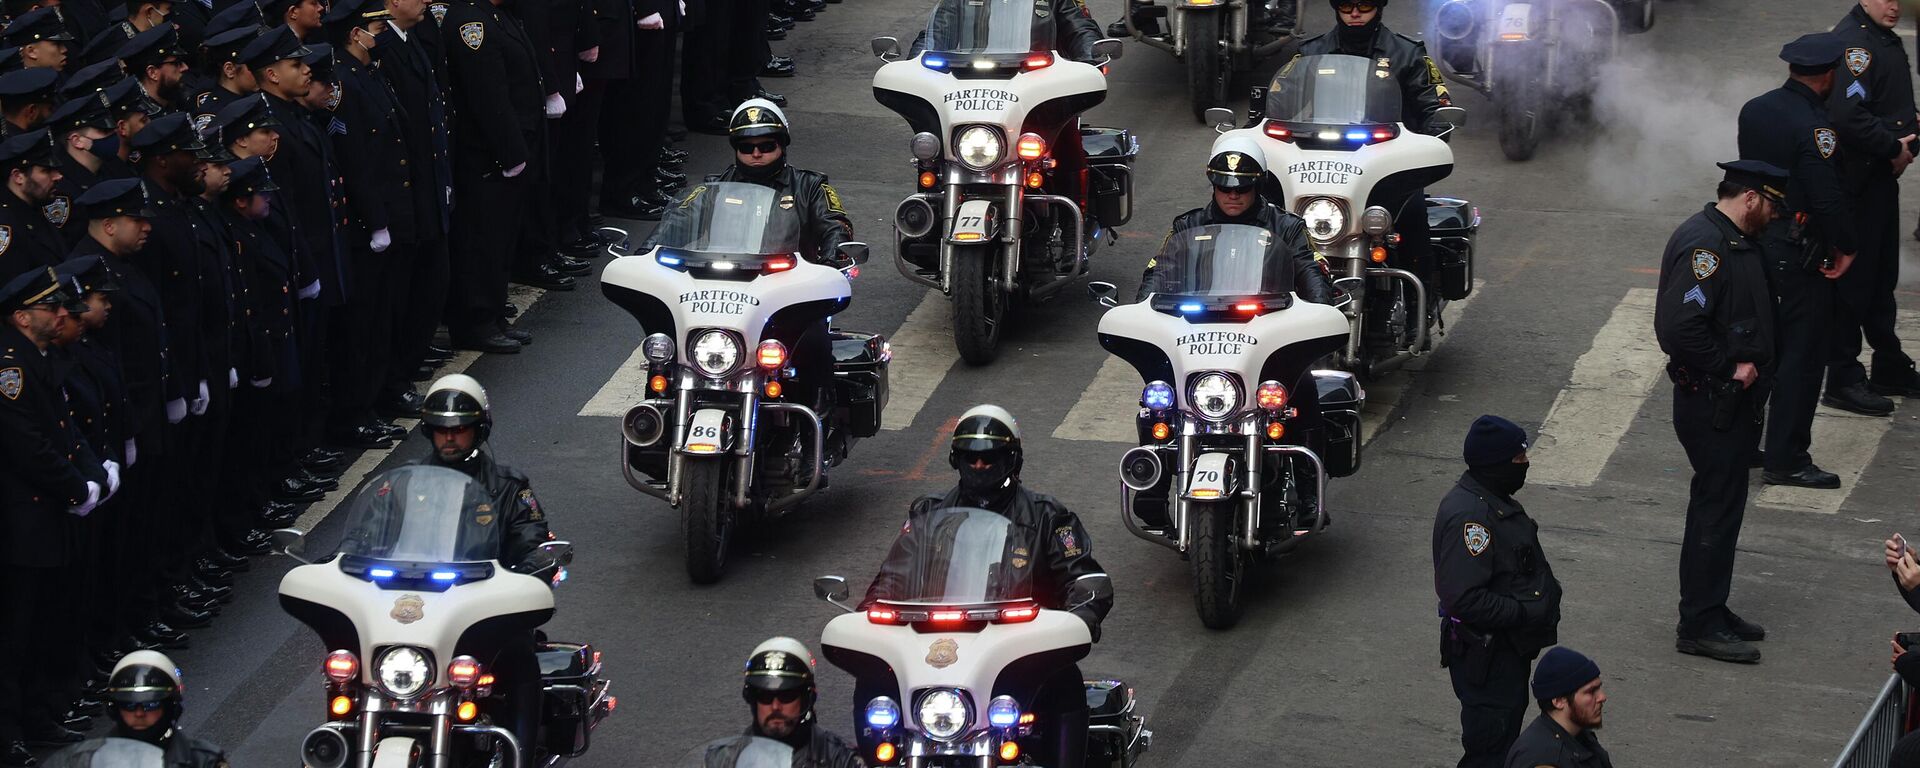 Motorcycle police from various jurisdictions lead an escort for the hearse carrying NYPD Officer Wilbert Mora's casket after Mora's funeral service at St. Patrick's Cathedral, Wednesday, Feb. 2, 2022, in New York. - Sputnik International, 1920, 26.04.2022